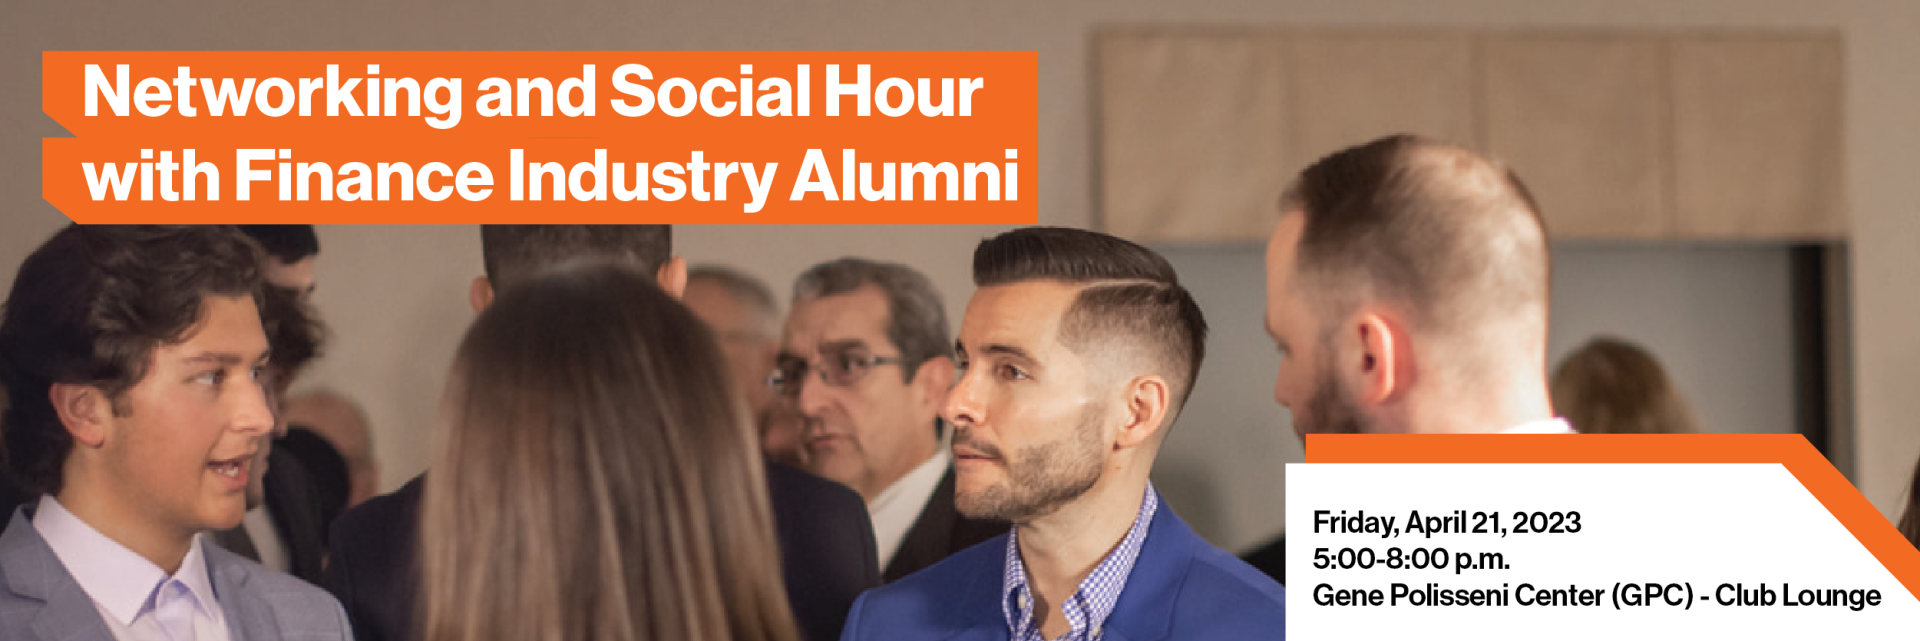 Speed Networking and Social Hour with Finance Industry Alumni  